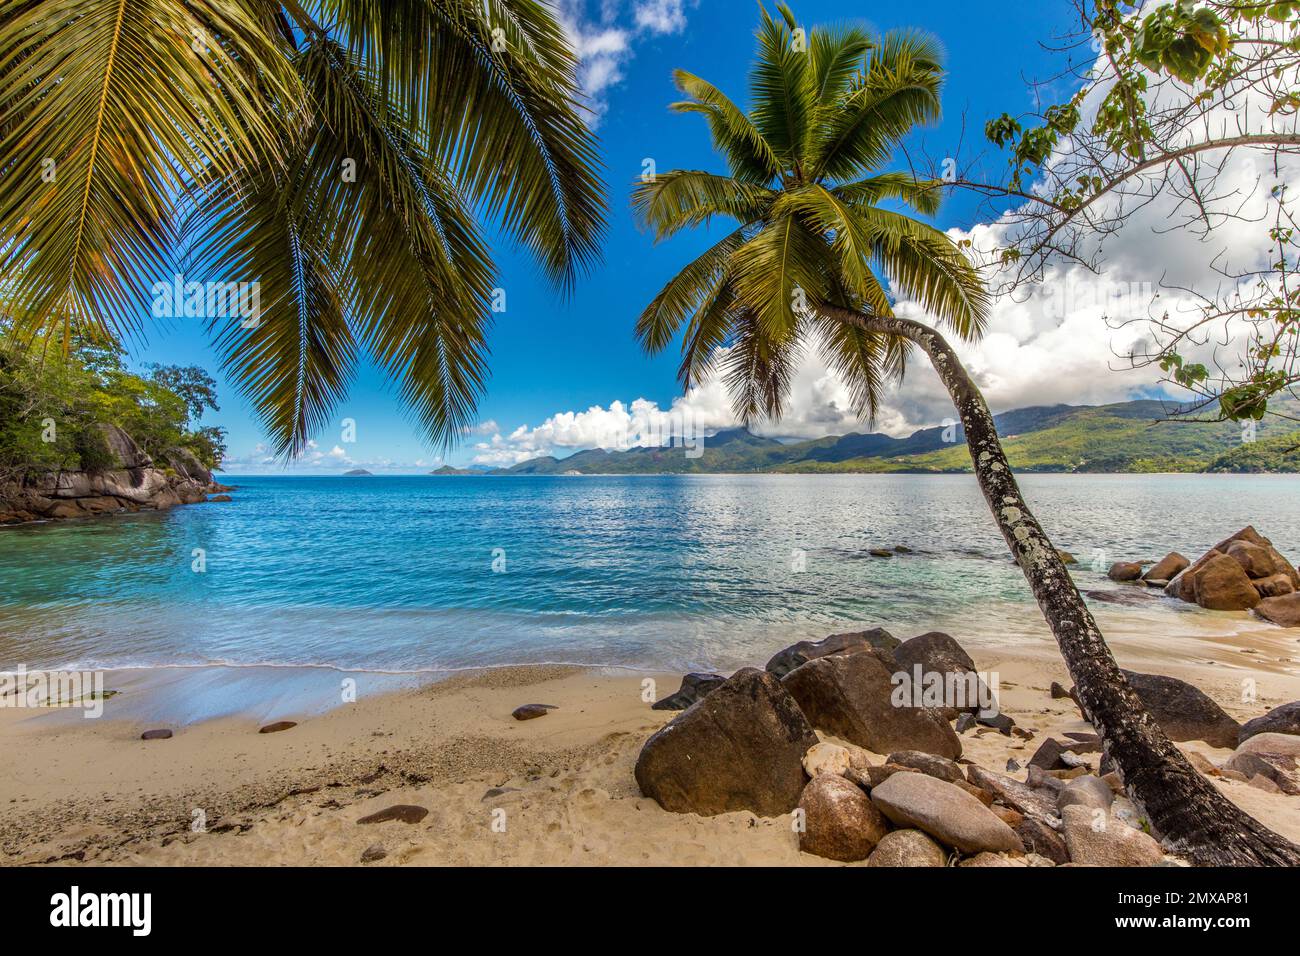 A scenic tropical beach in Baie Lazare on the island of Mahe, Seychelles in the Indian Ocean Stock Photo